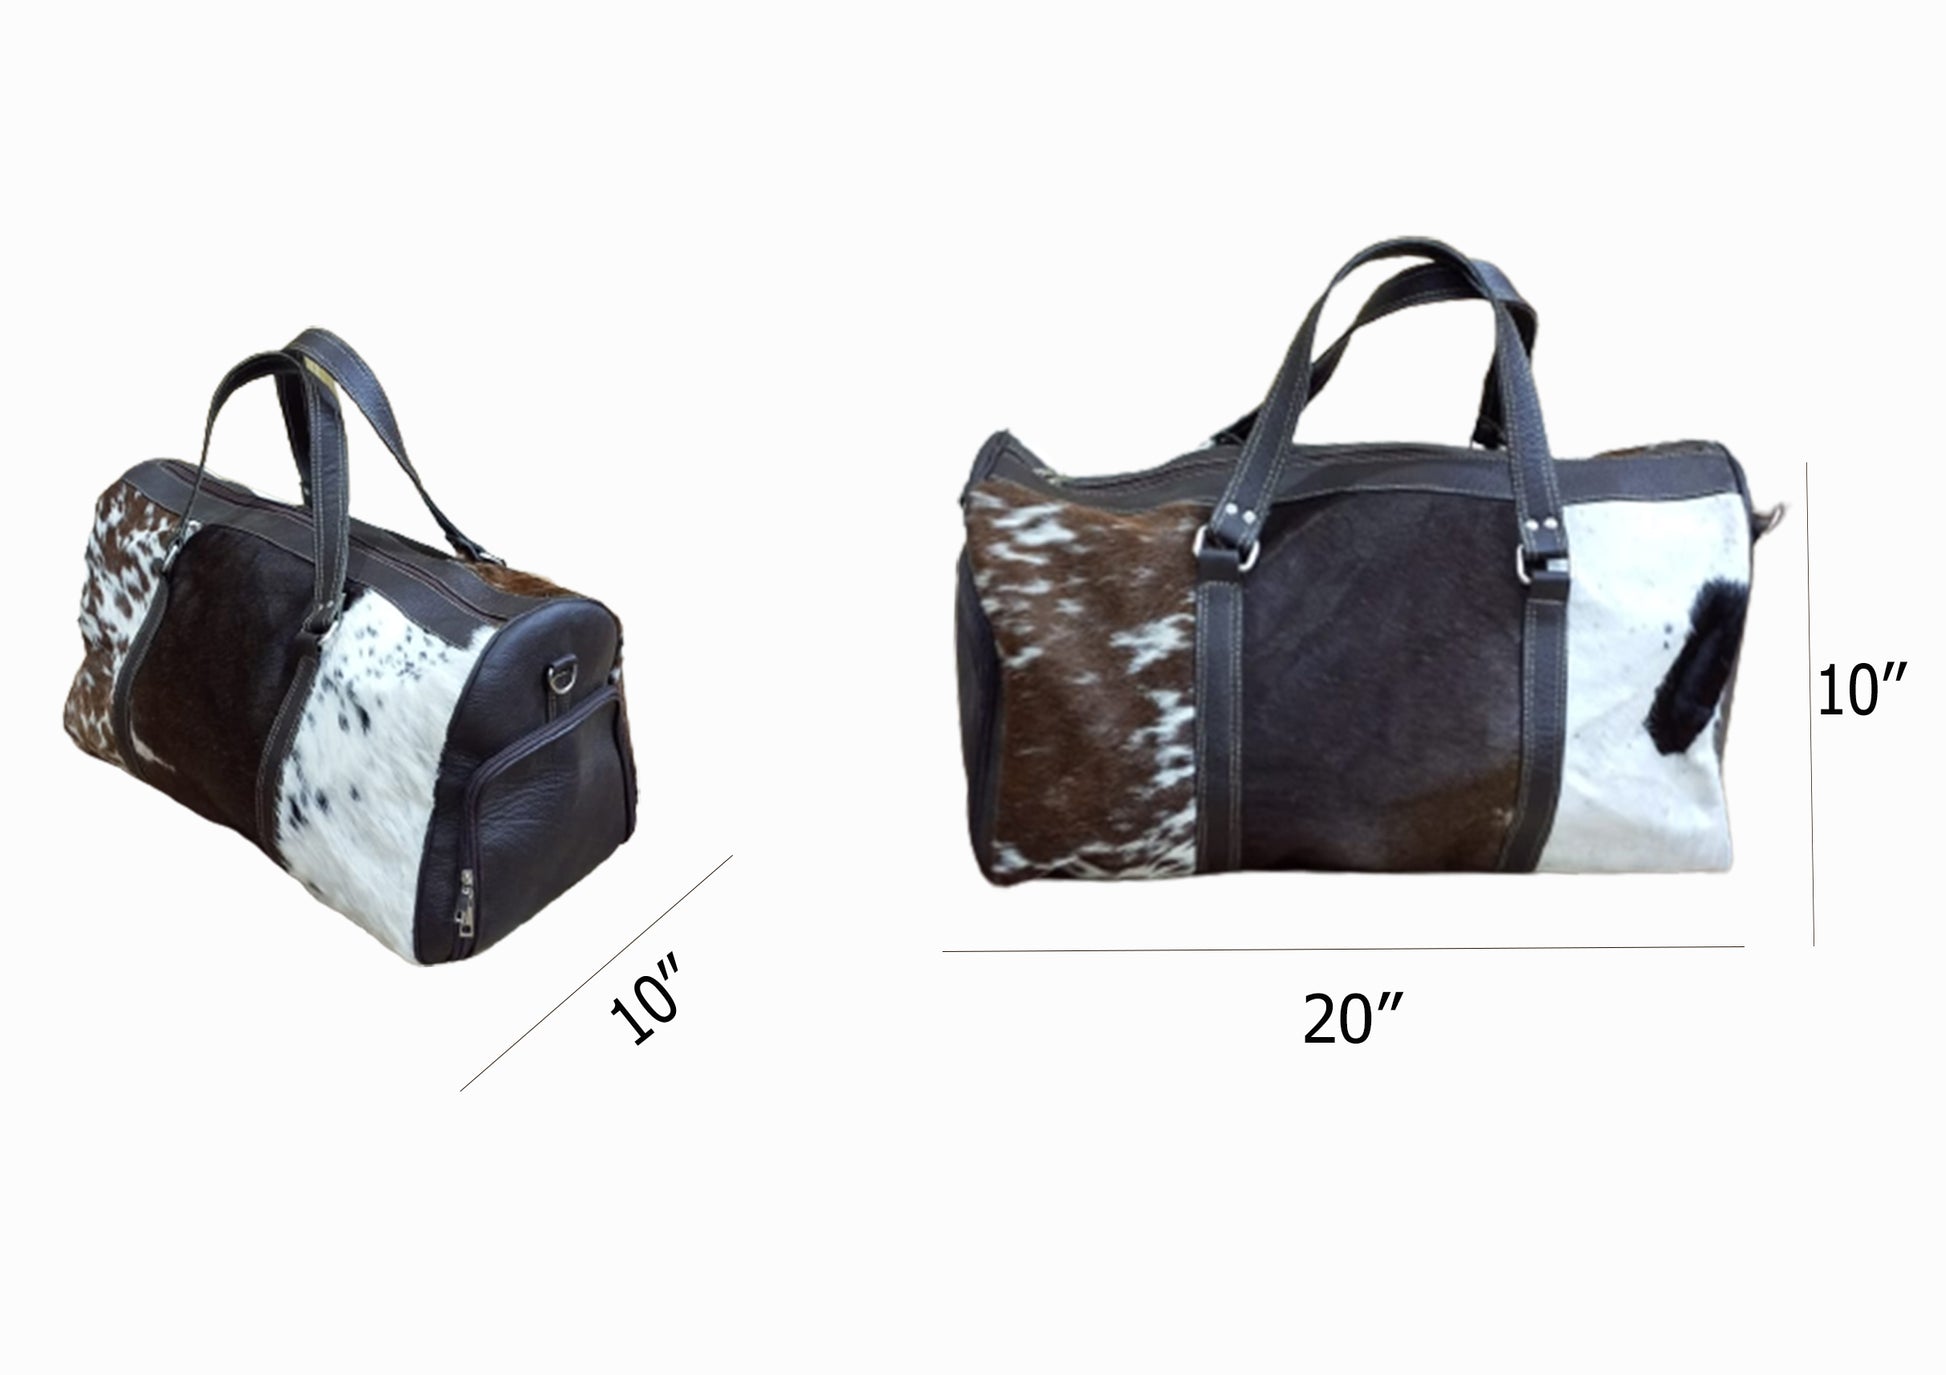 customize travel bag leather duffel bag large duffel gym bag leather gym bag camera bag leather hand carry luggage cowhide duffels